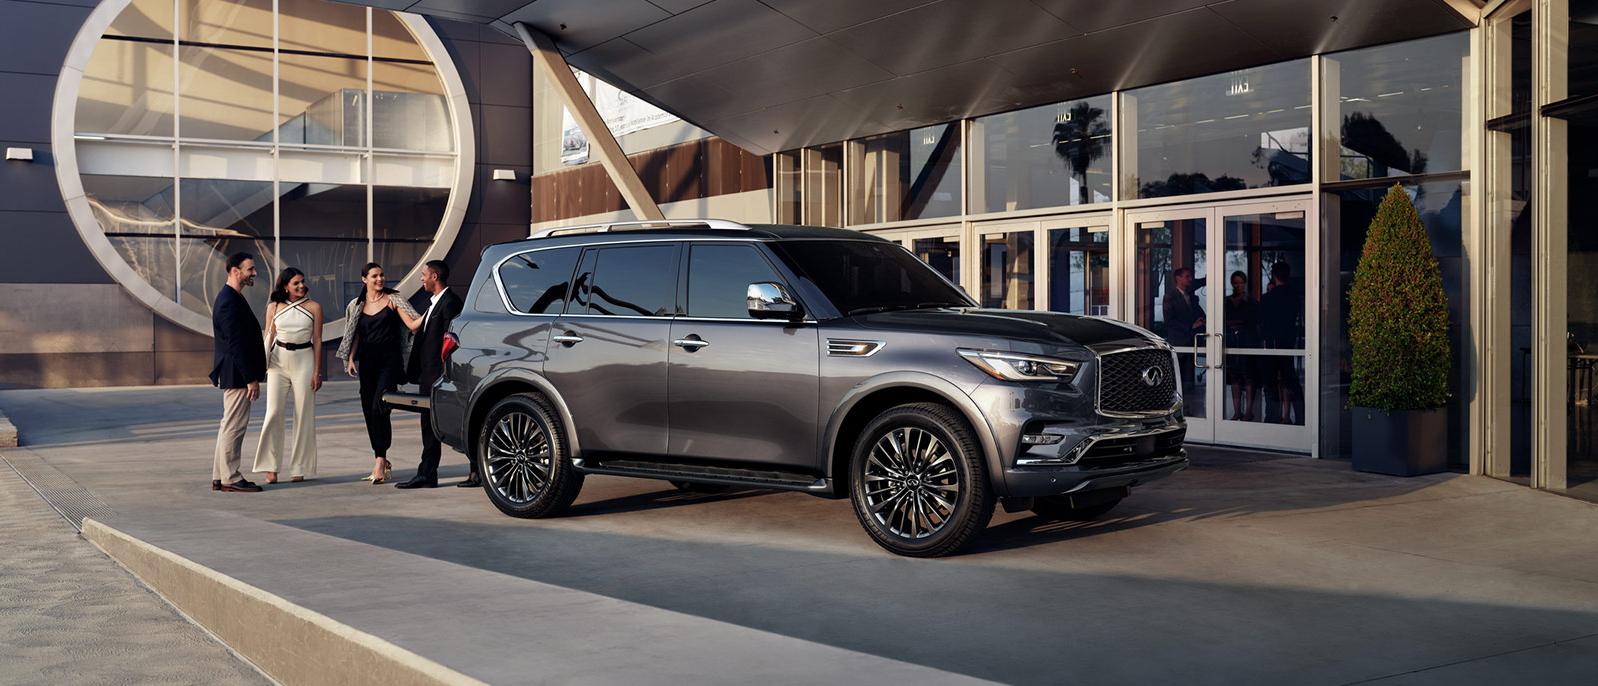 Graphite Shadow INFINITI QX80 parked outside a glass building